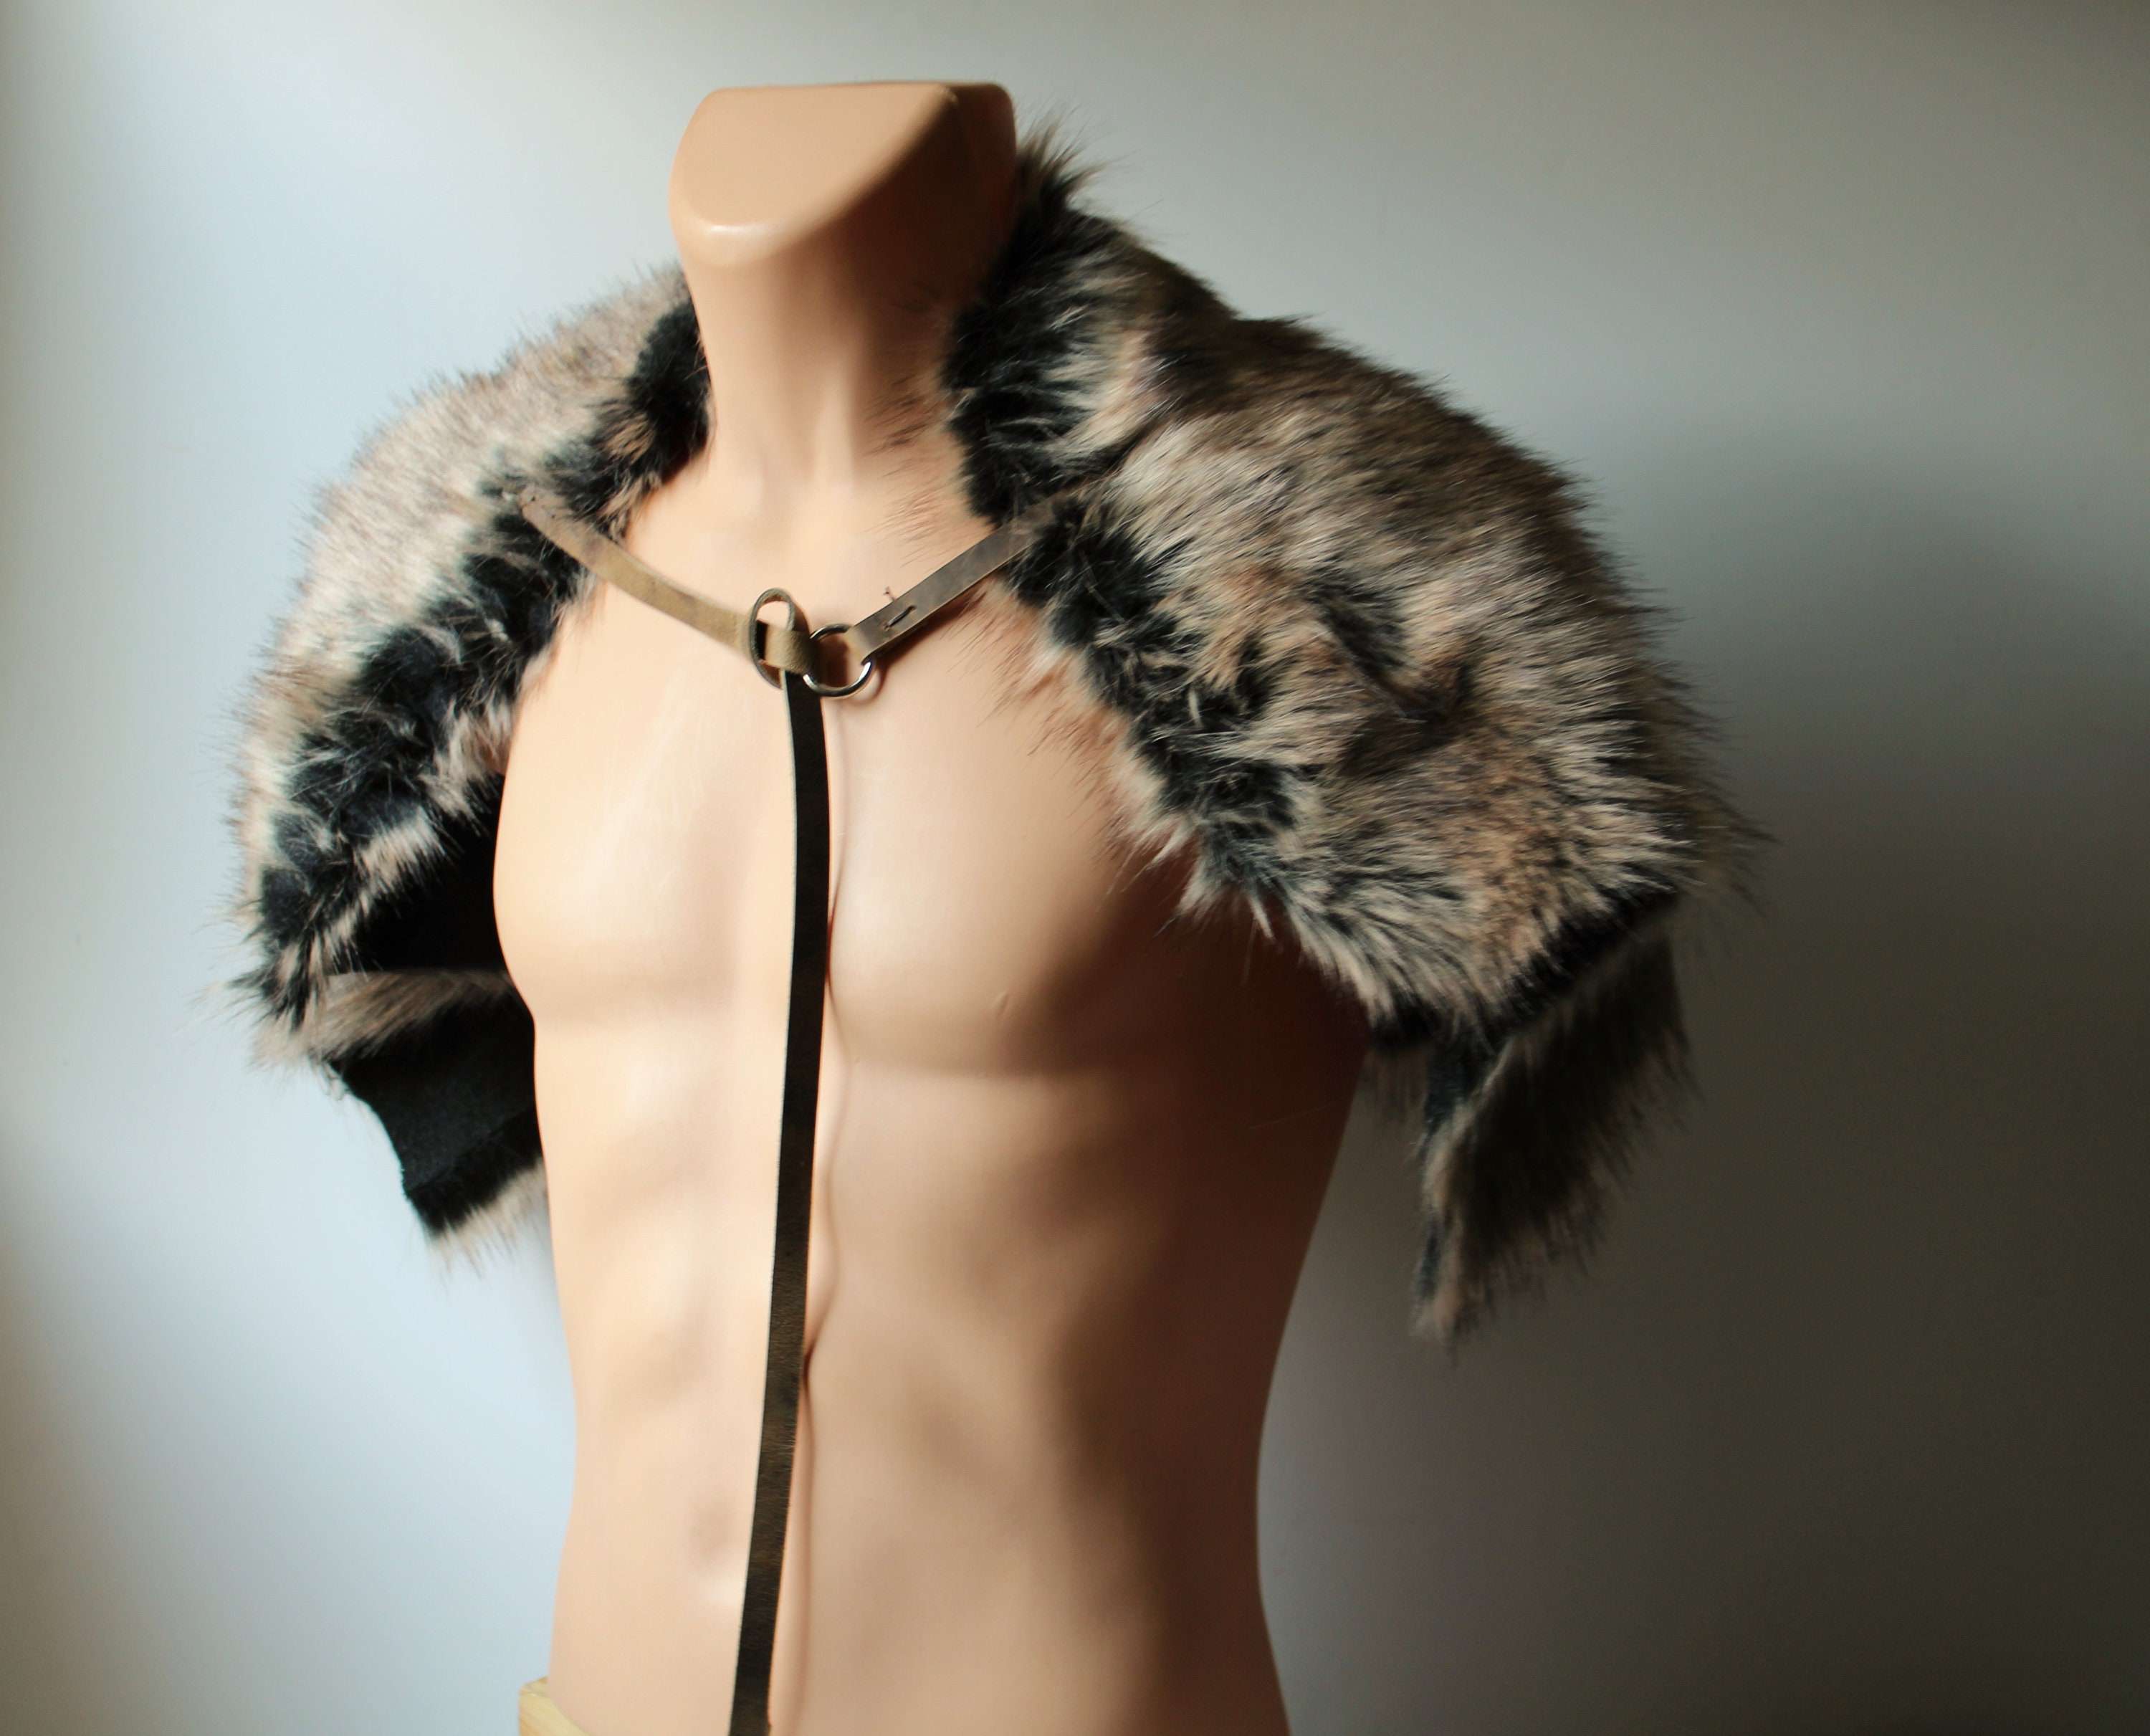 The Norseman Fur, Authentic Norse Viking Fur Mantle, Norse Wedding